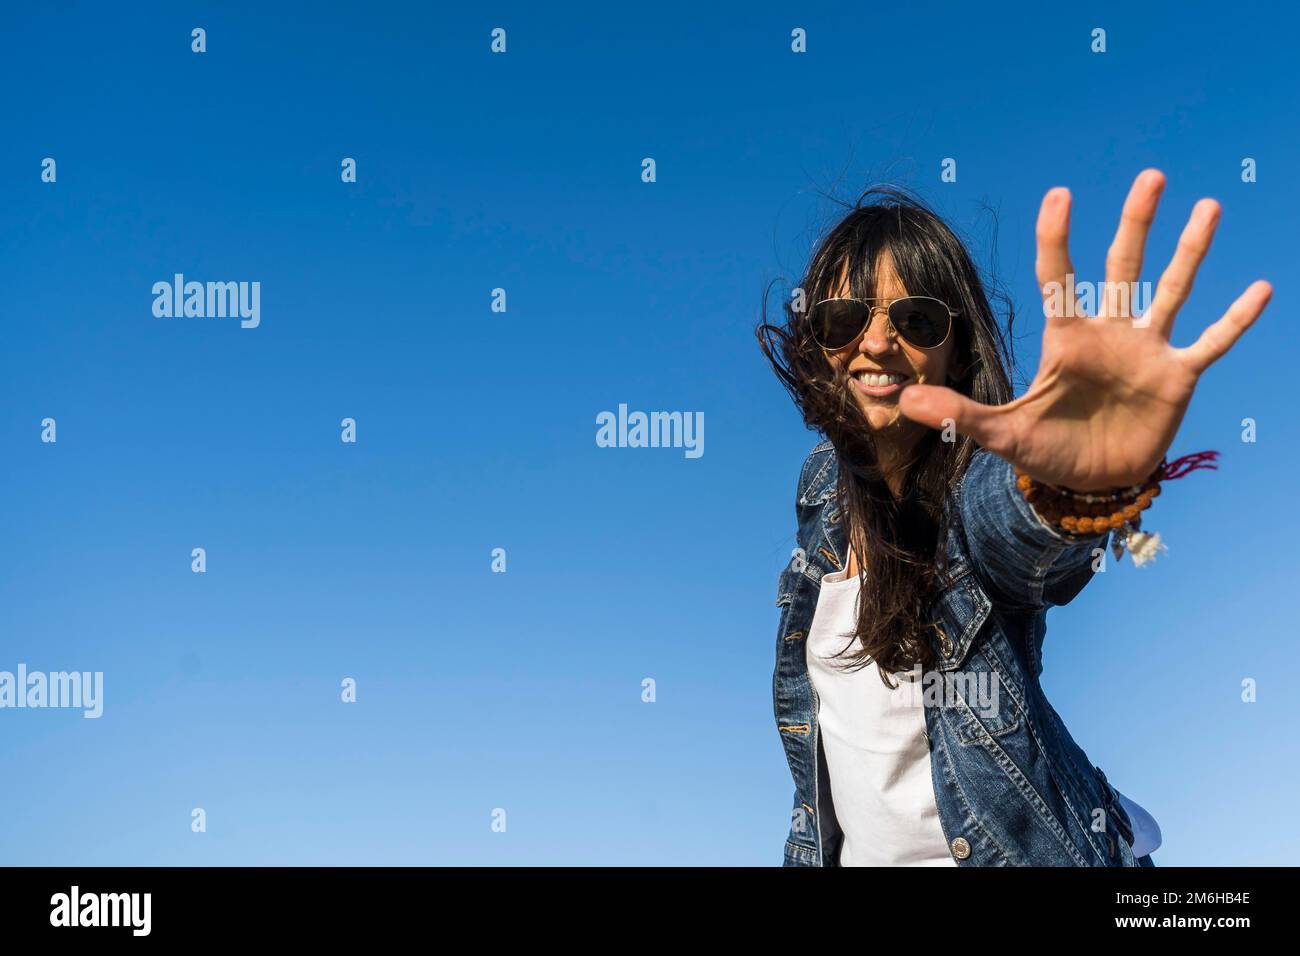 Low angle view of a similing woman while showing her hand. Blue sky background Stock Photo